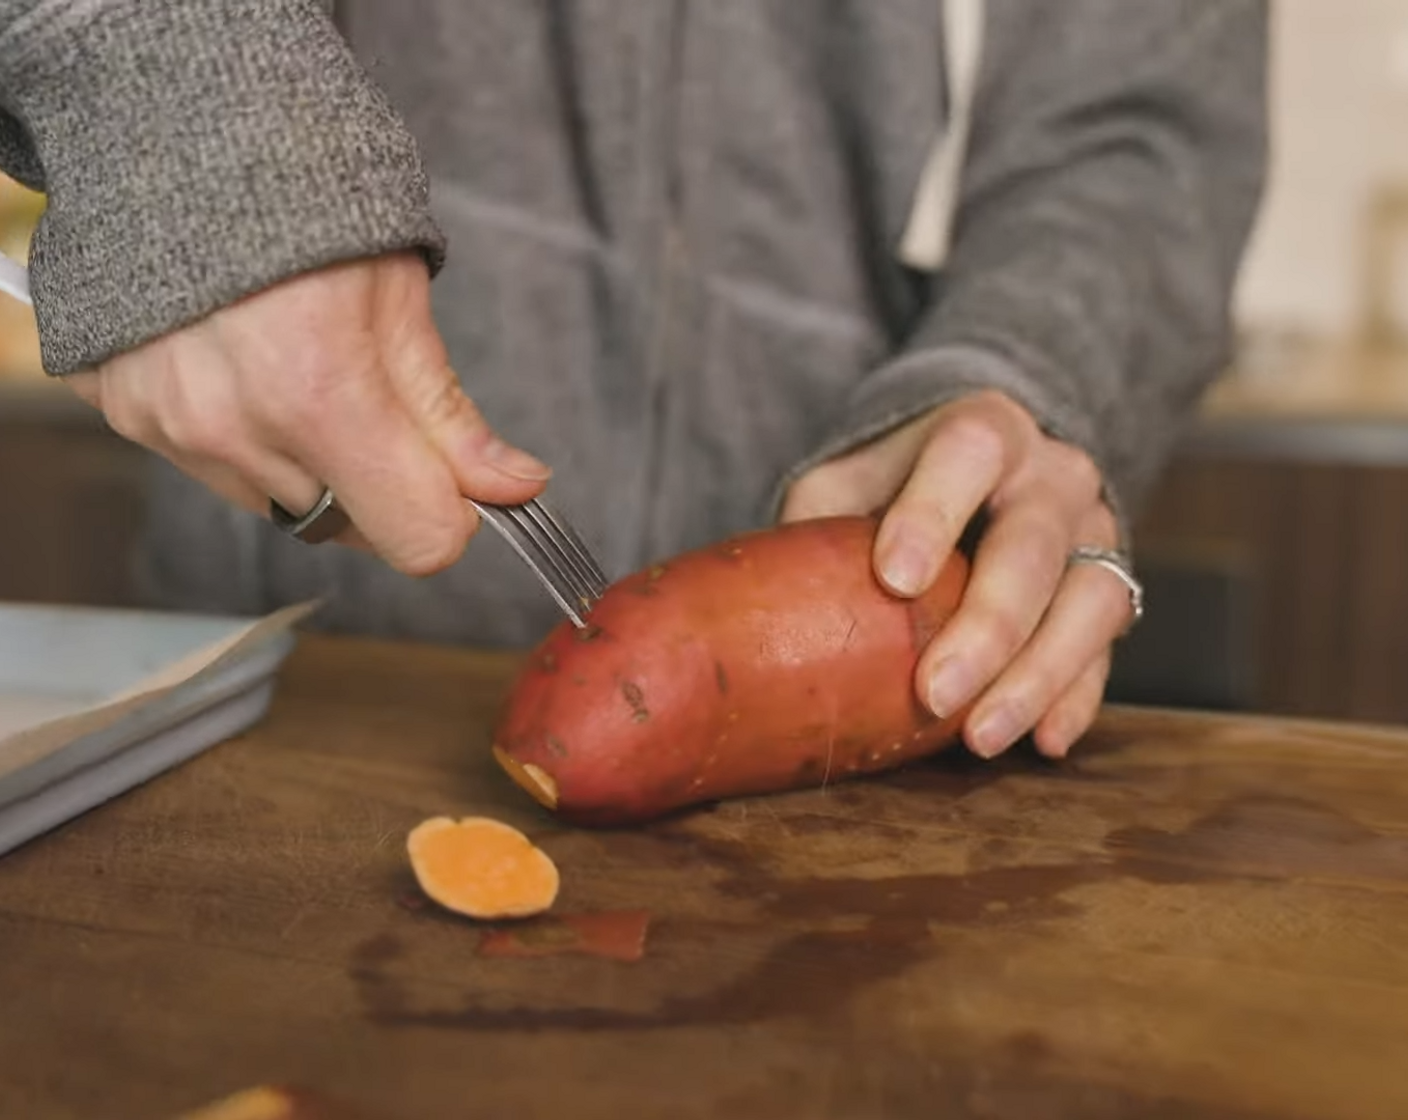 step 2 Using a fork, poke multiple holes into the Sweet Potatoes (2).